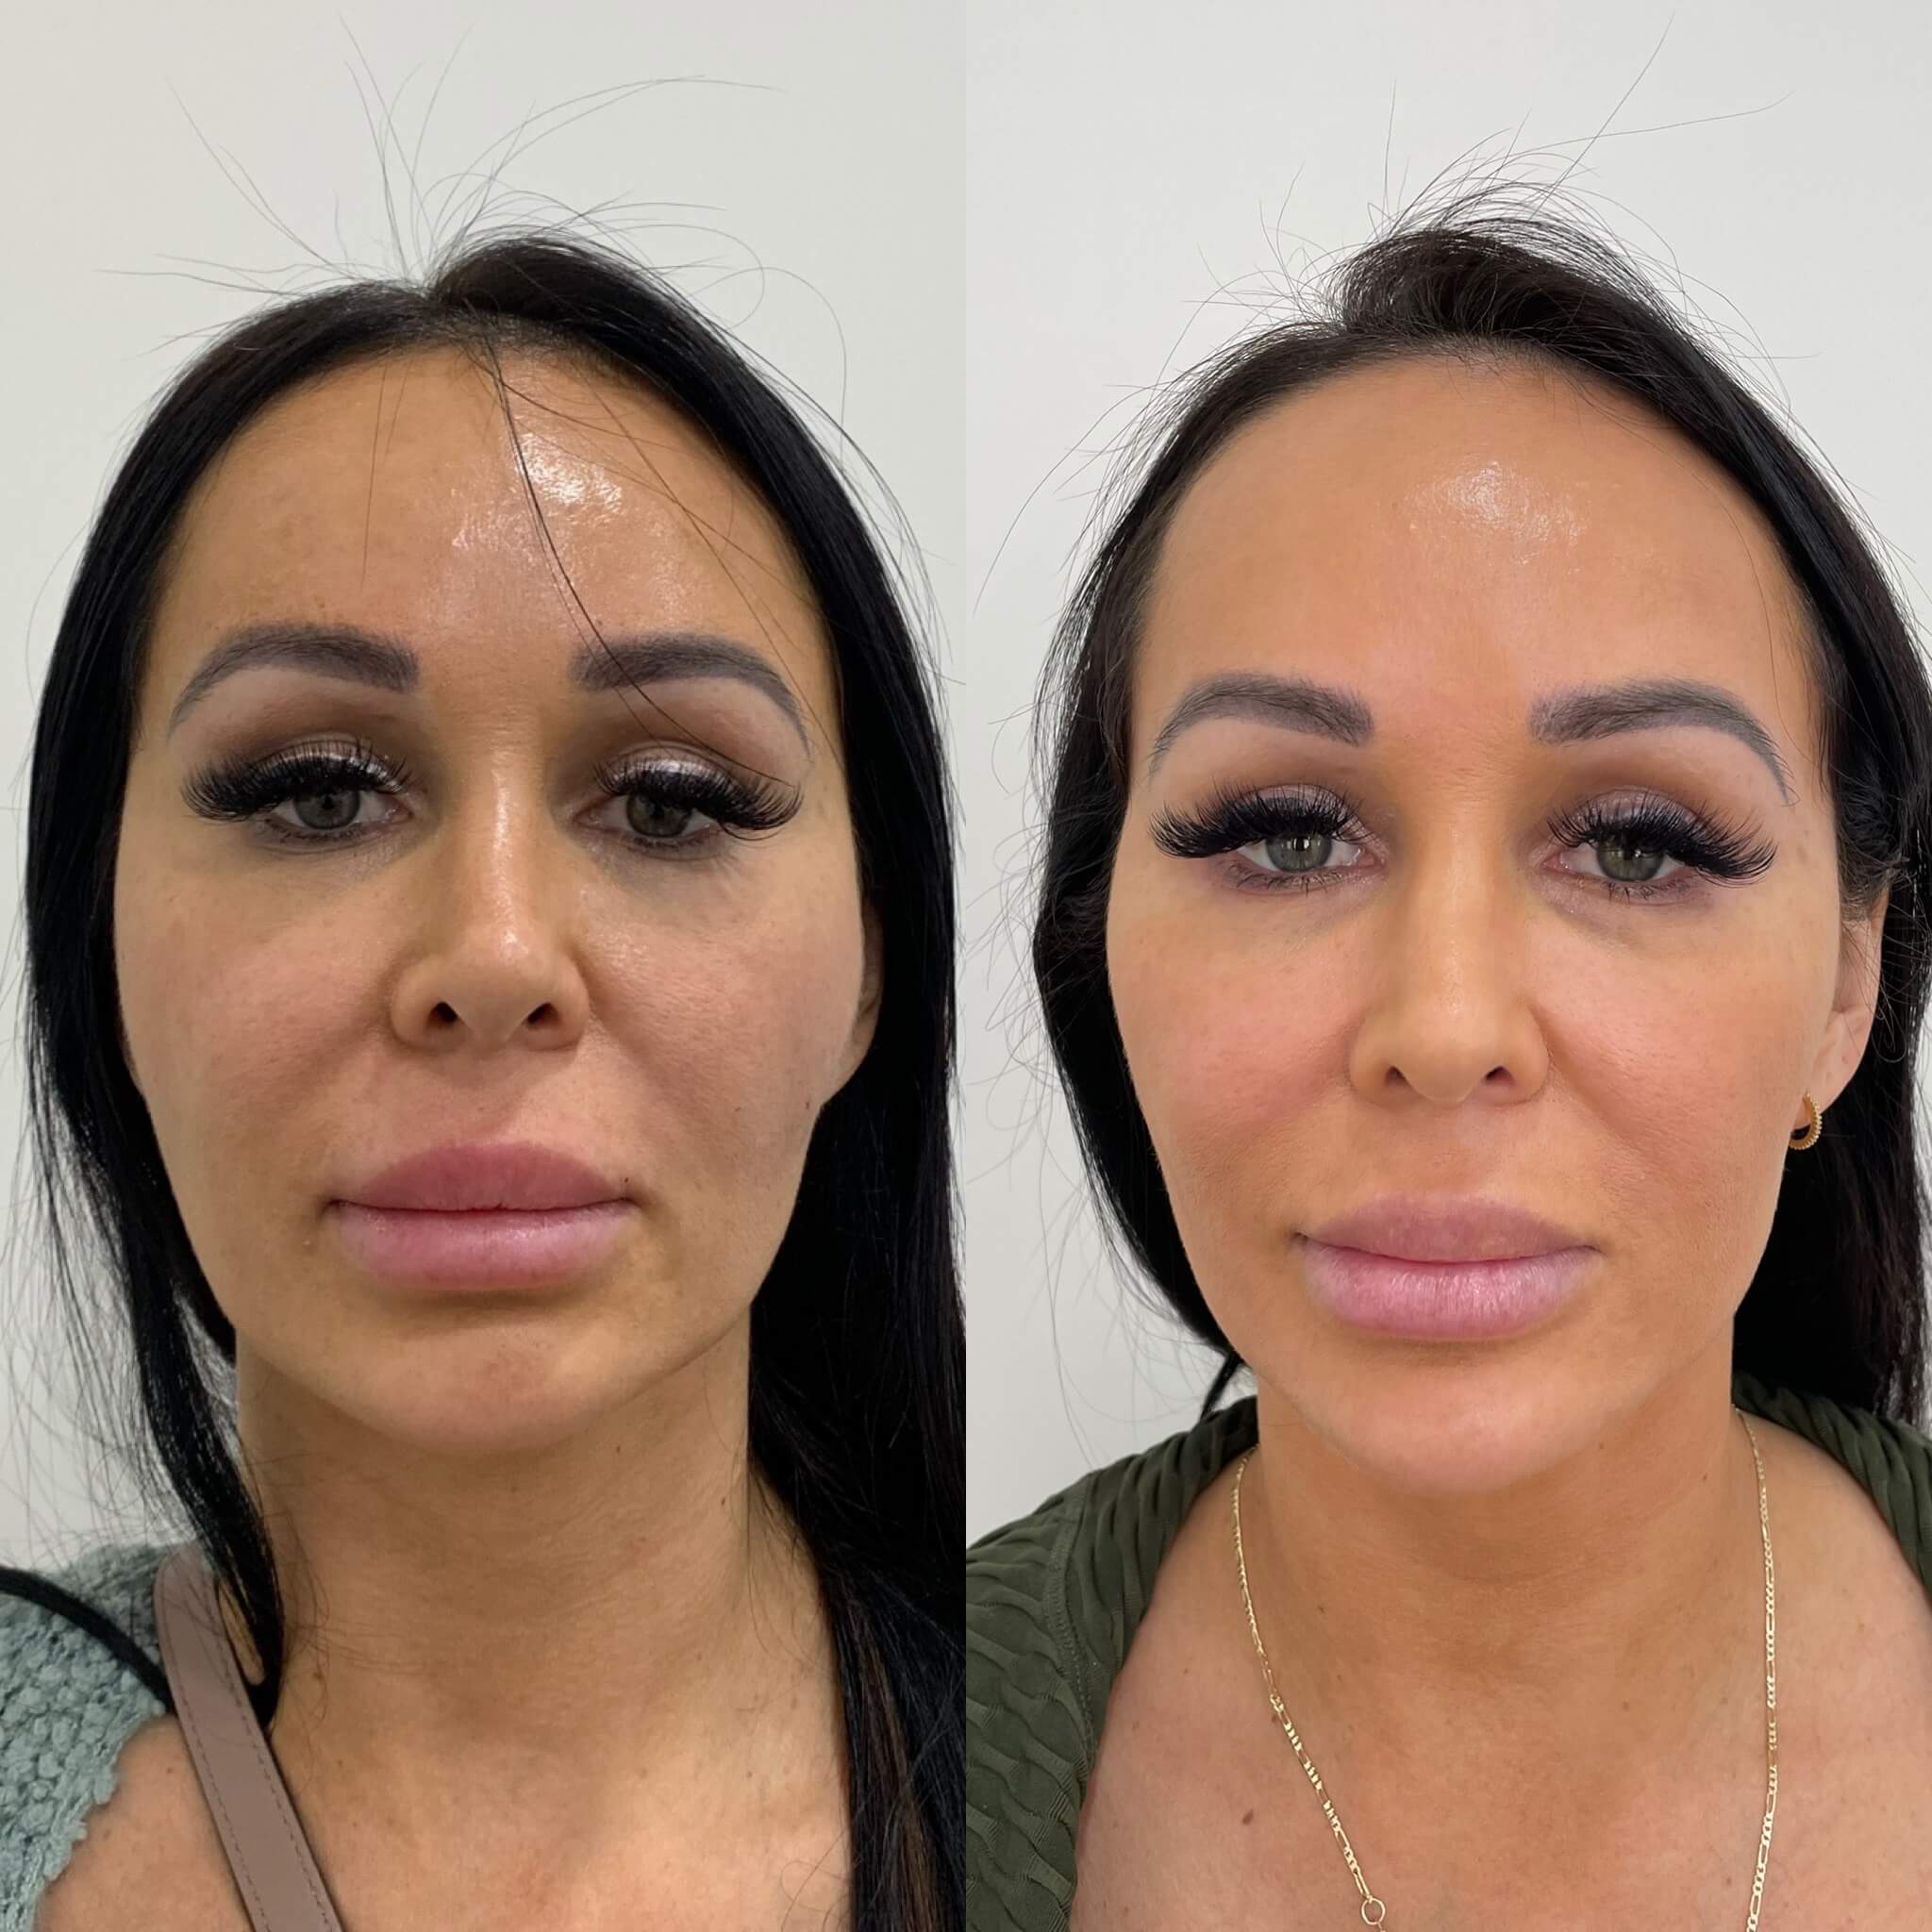 Before and After Sculptra treatment | Beauty Boost Med Spa at Newport Beach, CA